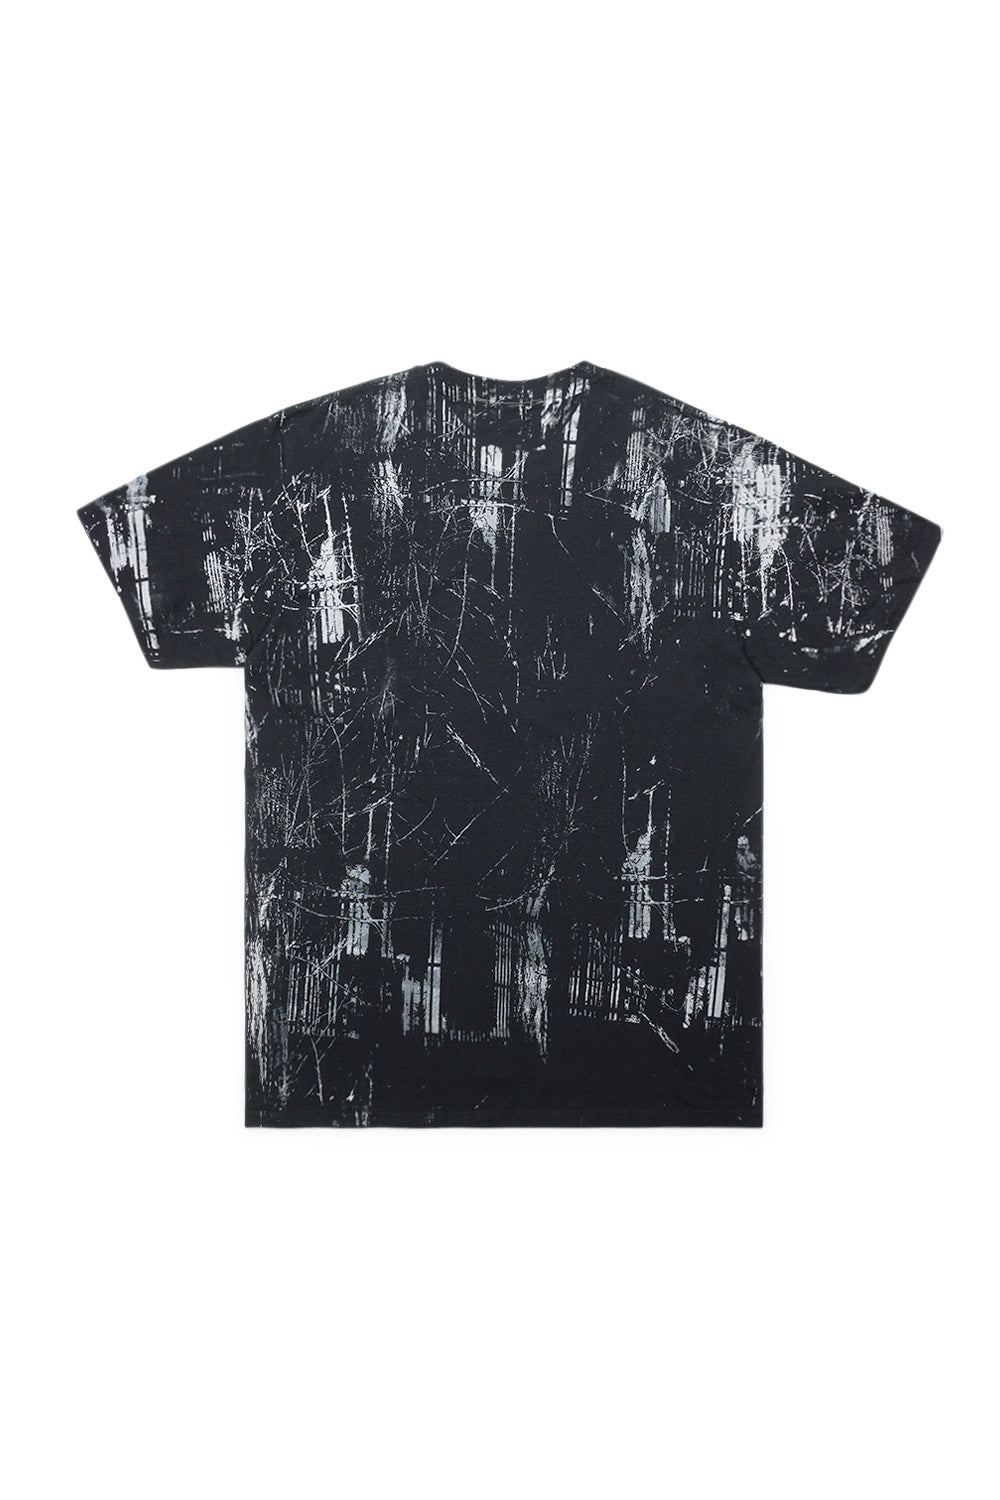 Personal Joint Grave Tree Camo T-Shirt Black - BONKERS